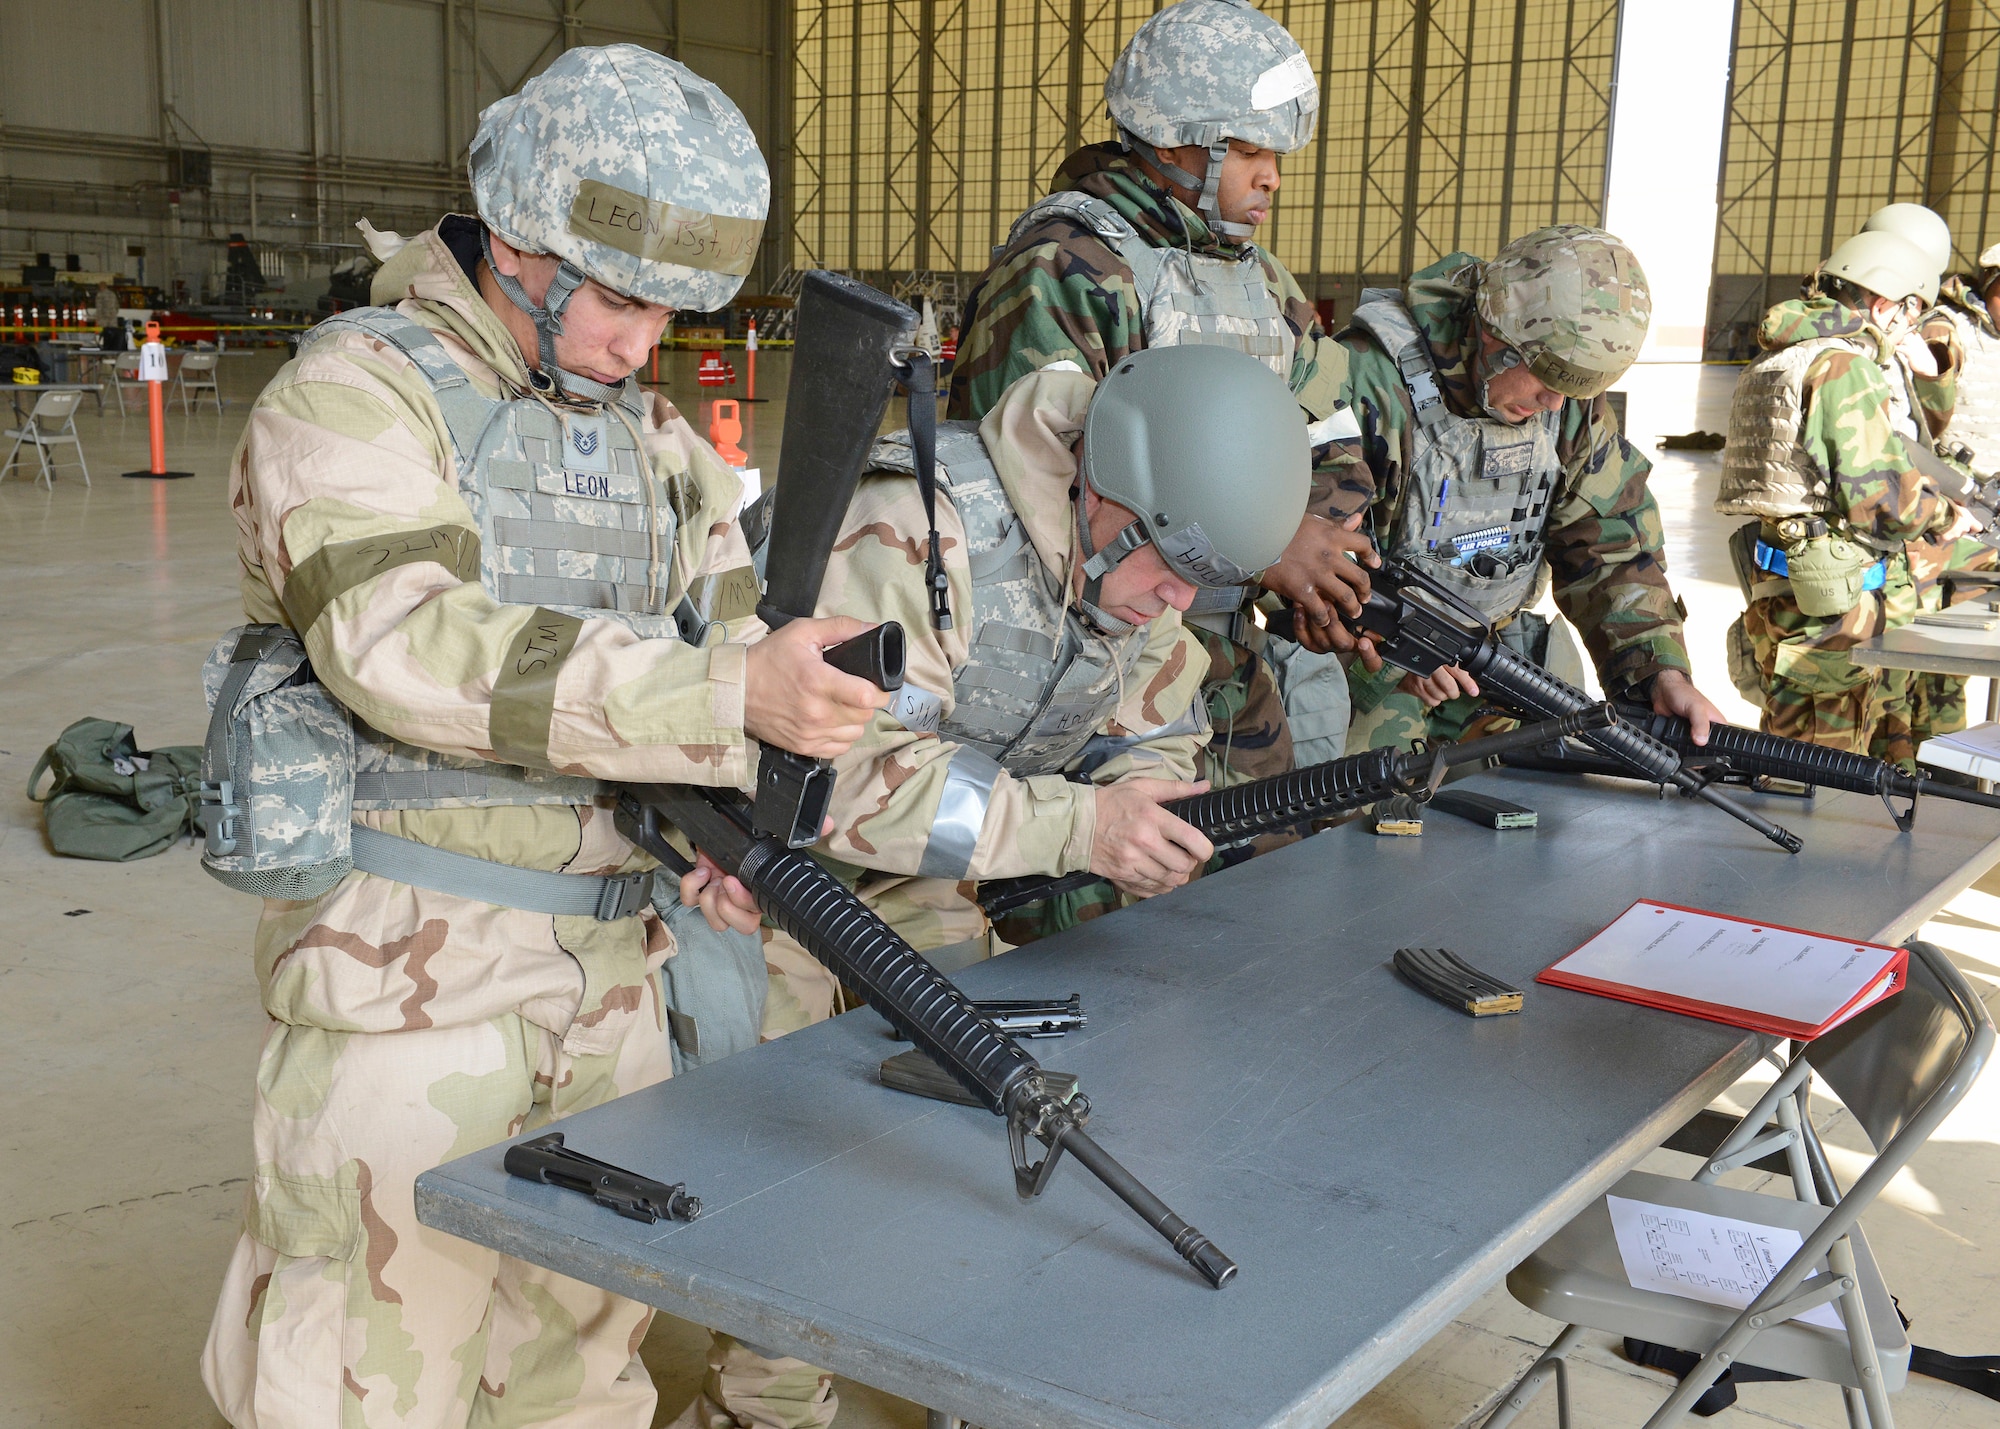 Tech. Sgt. David Leon, 412th Security Forces Squadron (left), disassembles an M-16 assault rifle at one of the exercise stations in Hangar 1600 during Test Wing Readiness Exercise 18-03, Aug. 9. (U.S. Air Force photo by Kenji Thuloweit)